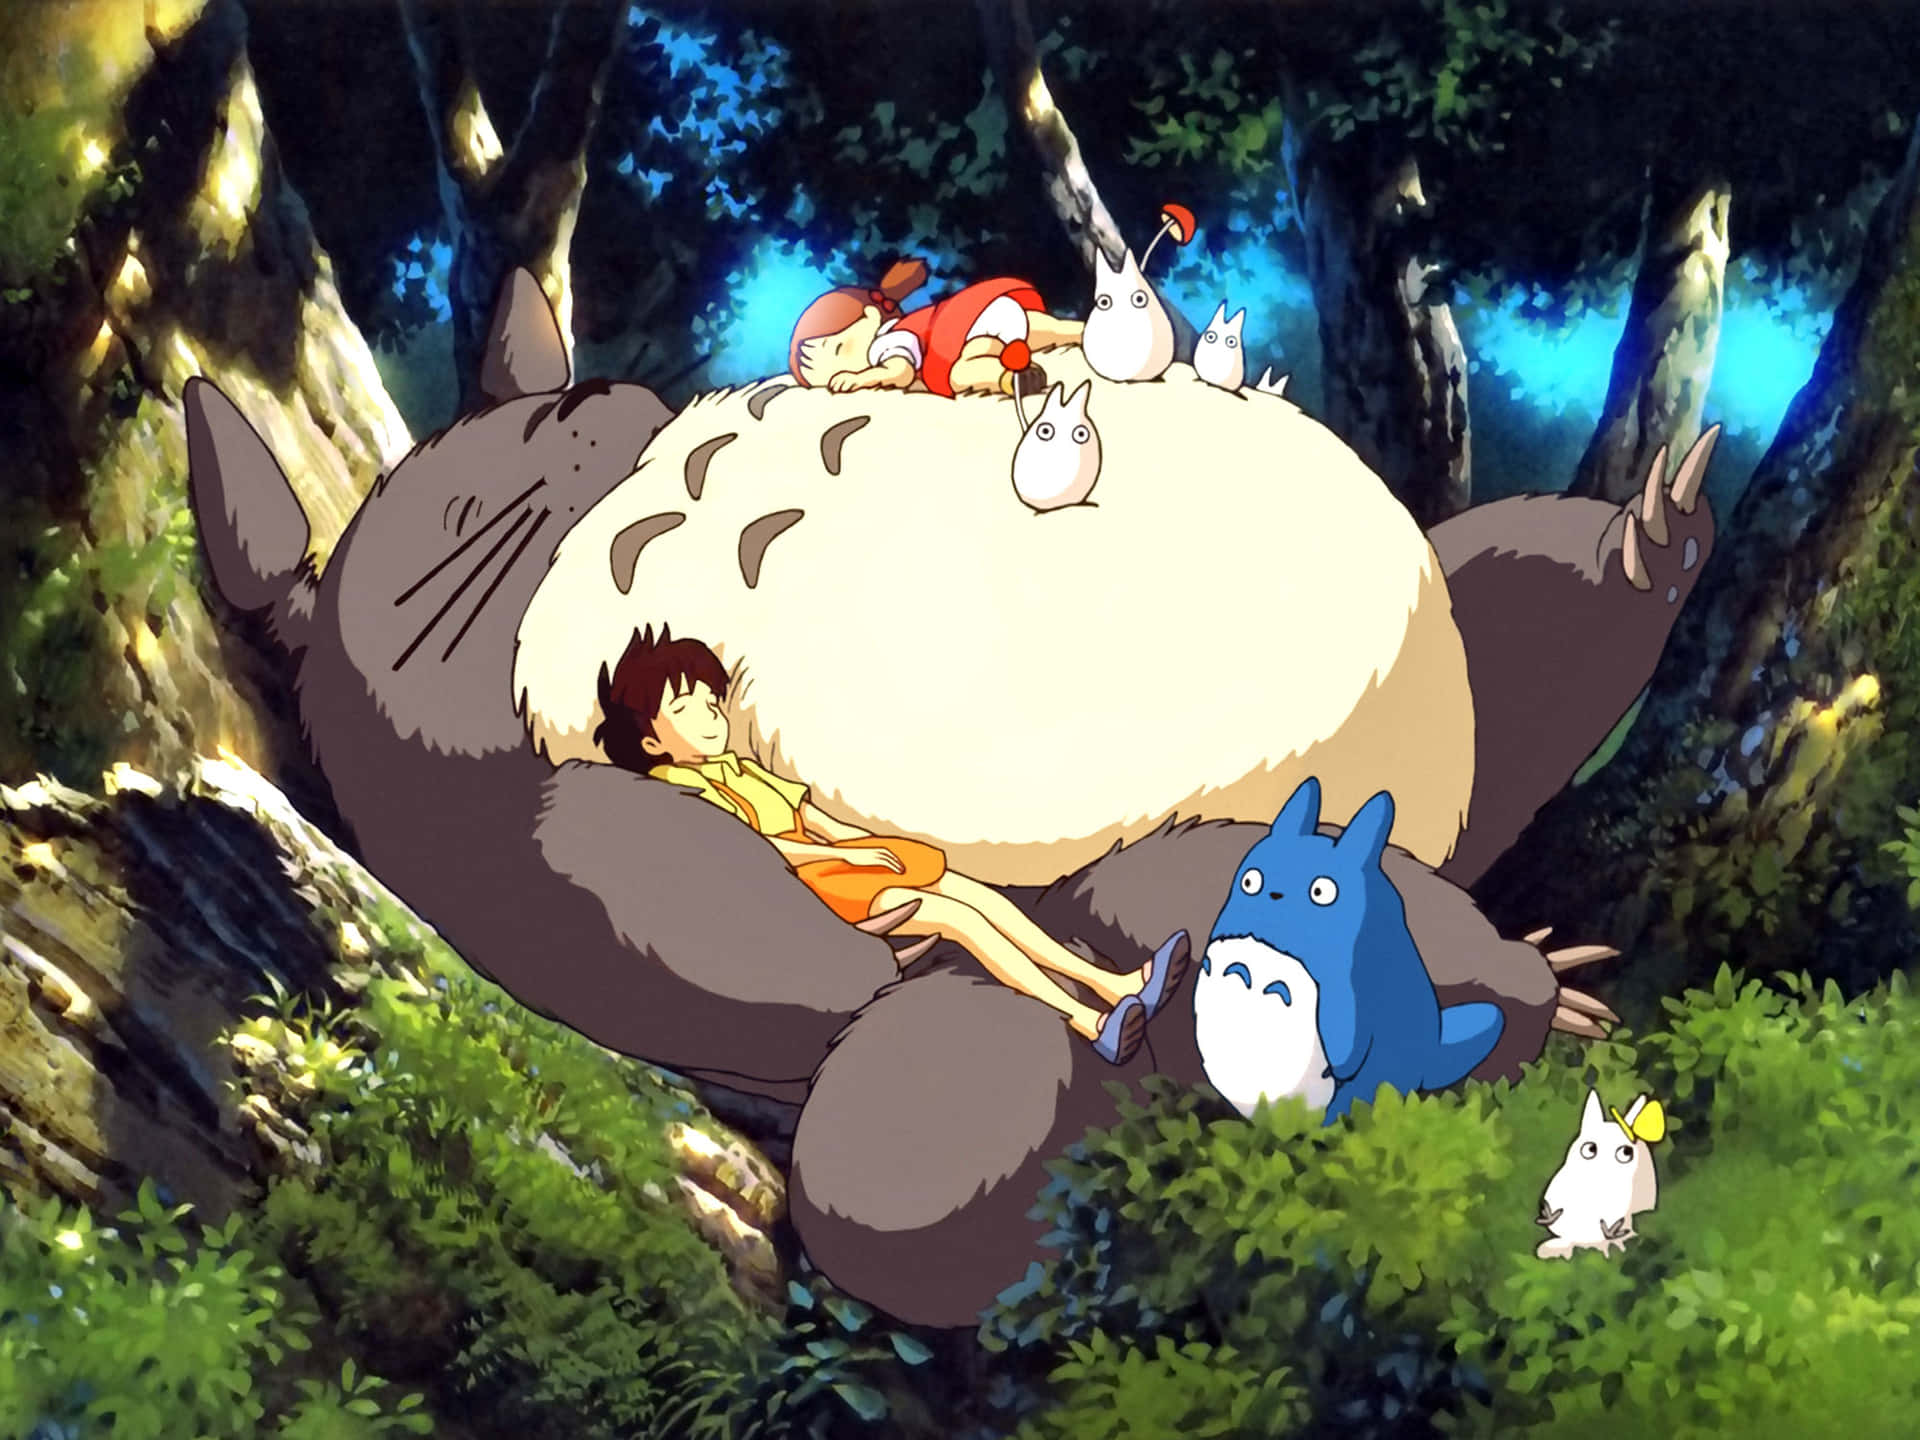 Hop on and join the adventure with Ghibli!